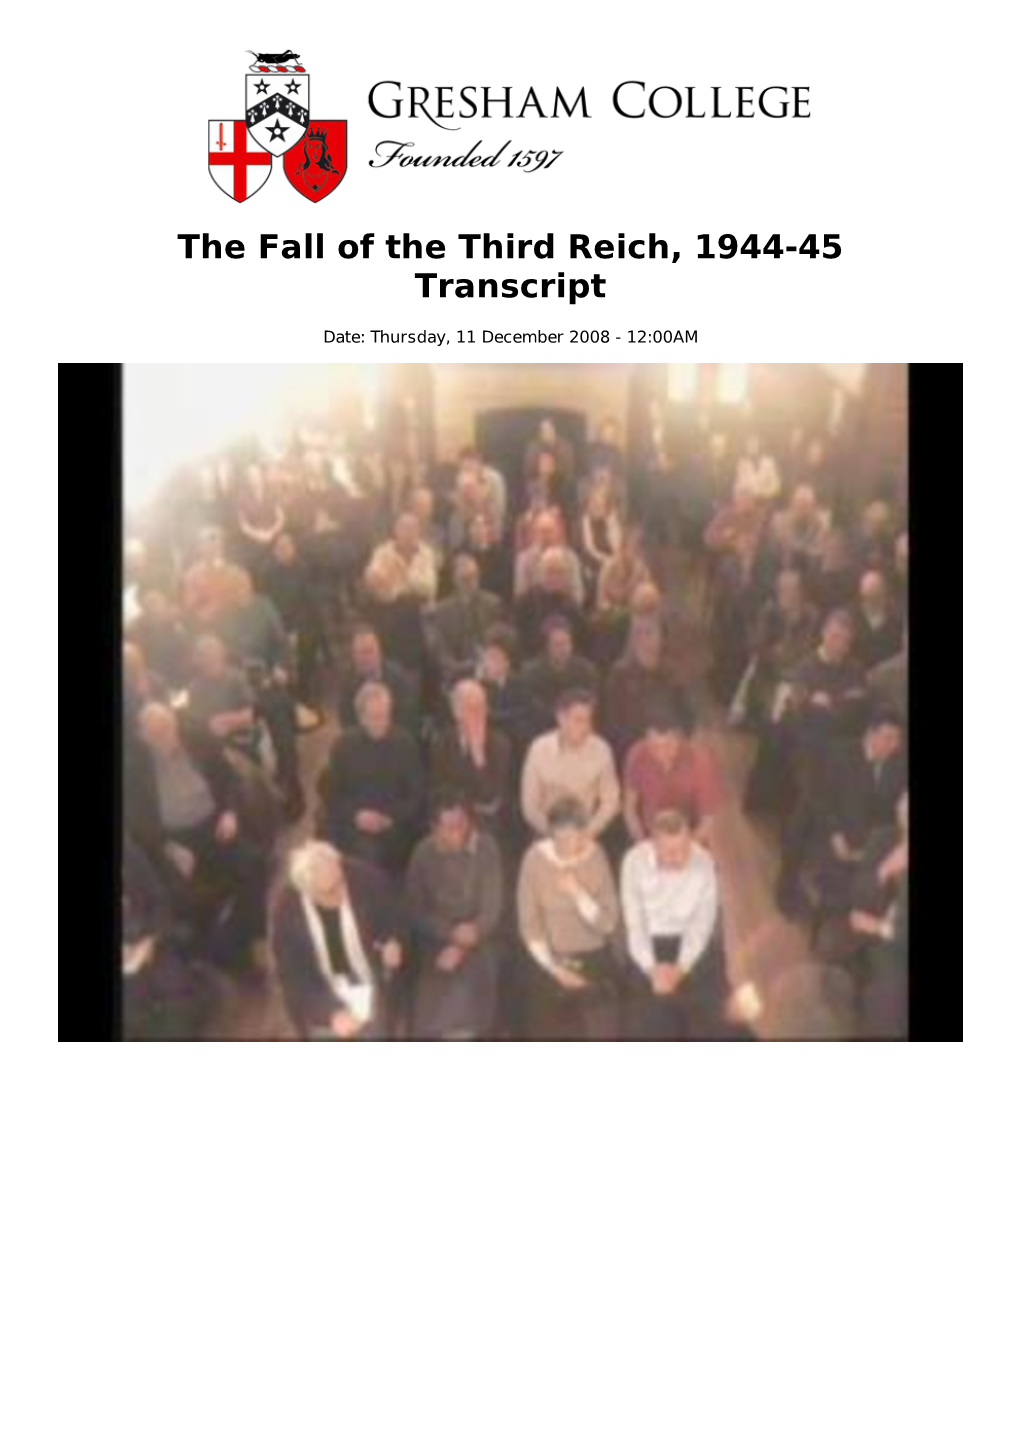 The Fall of the Third Reich, 1944-45 Transcript